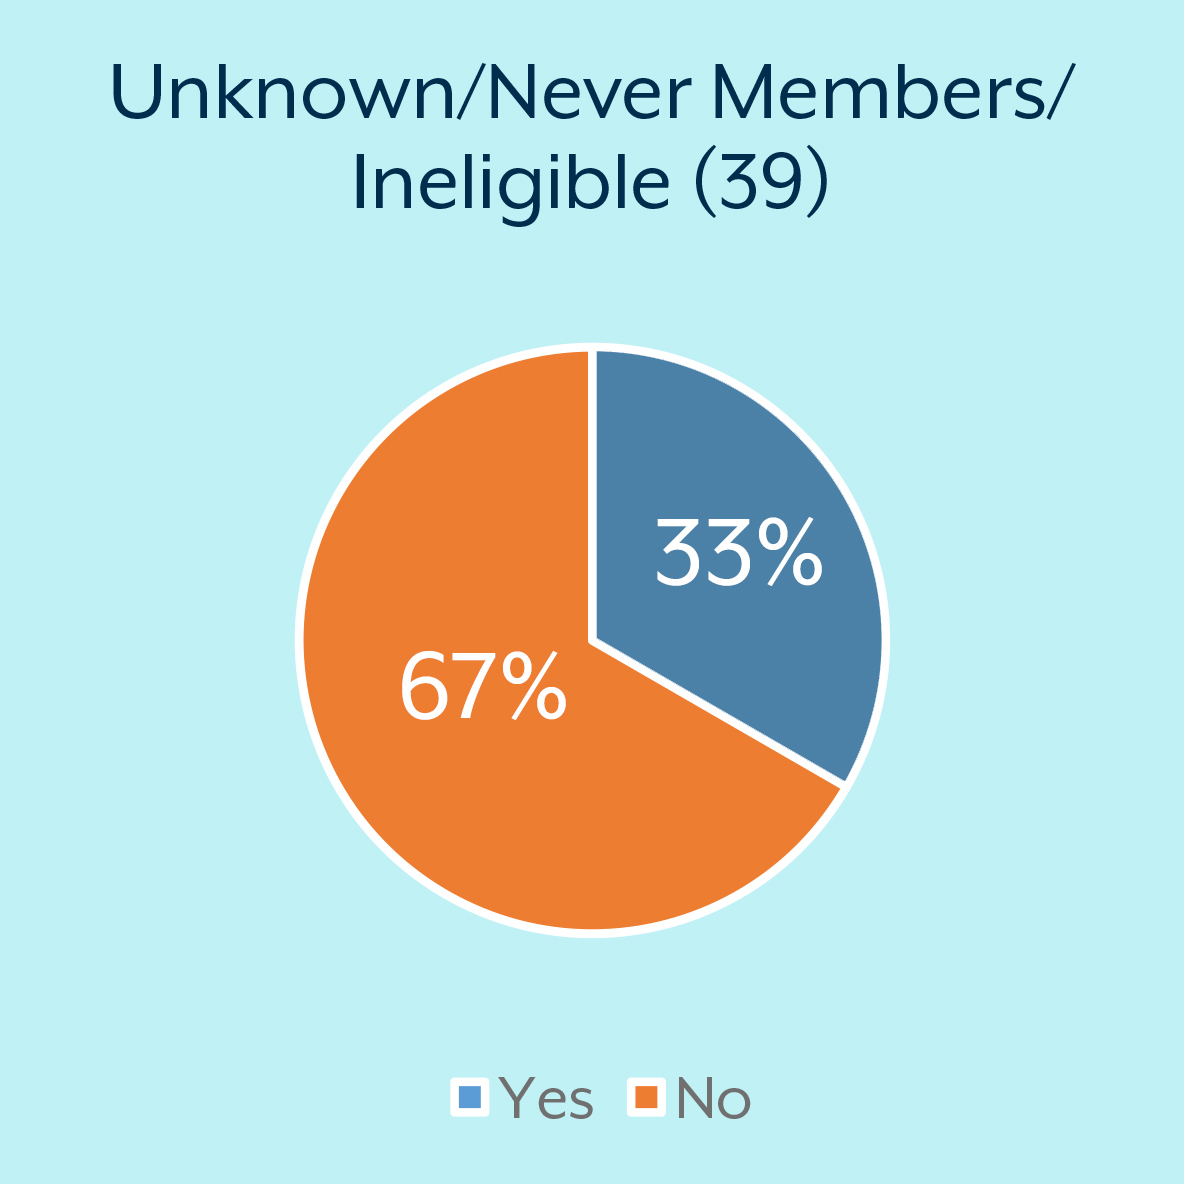 Unknown/Never Members/Ineligible: Yes = 33% No = 67%